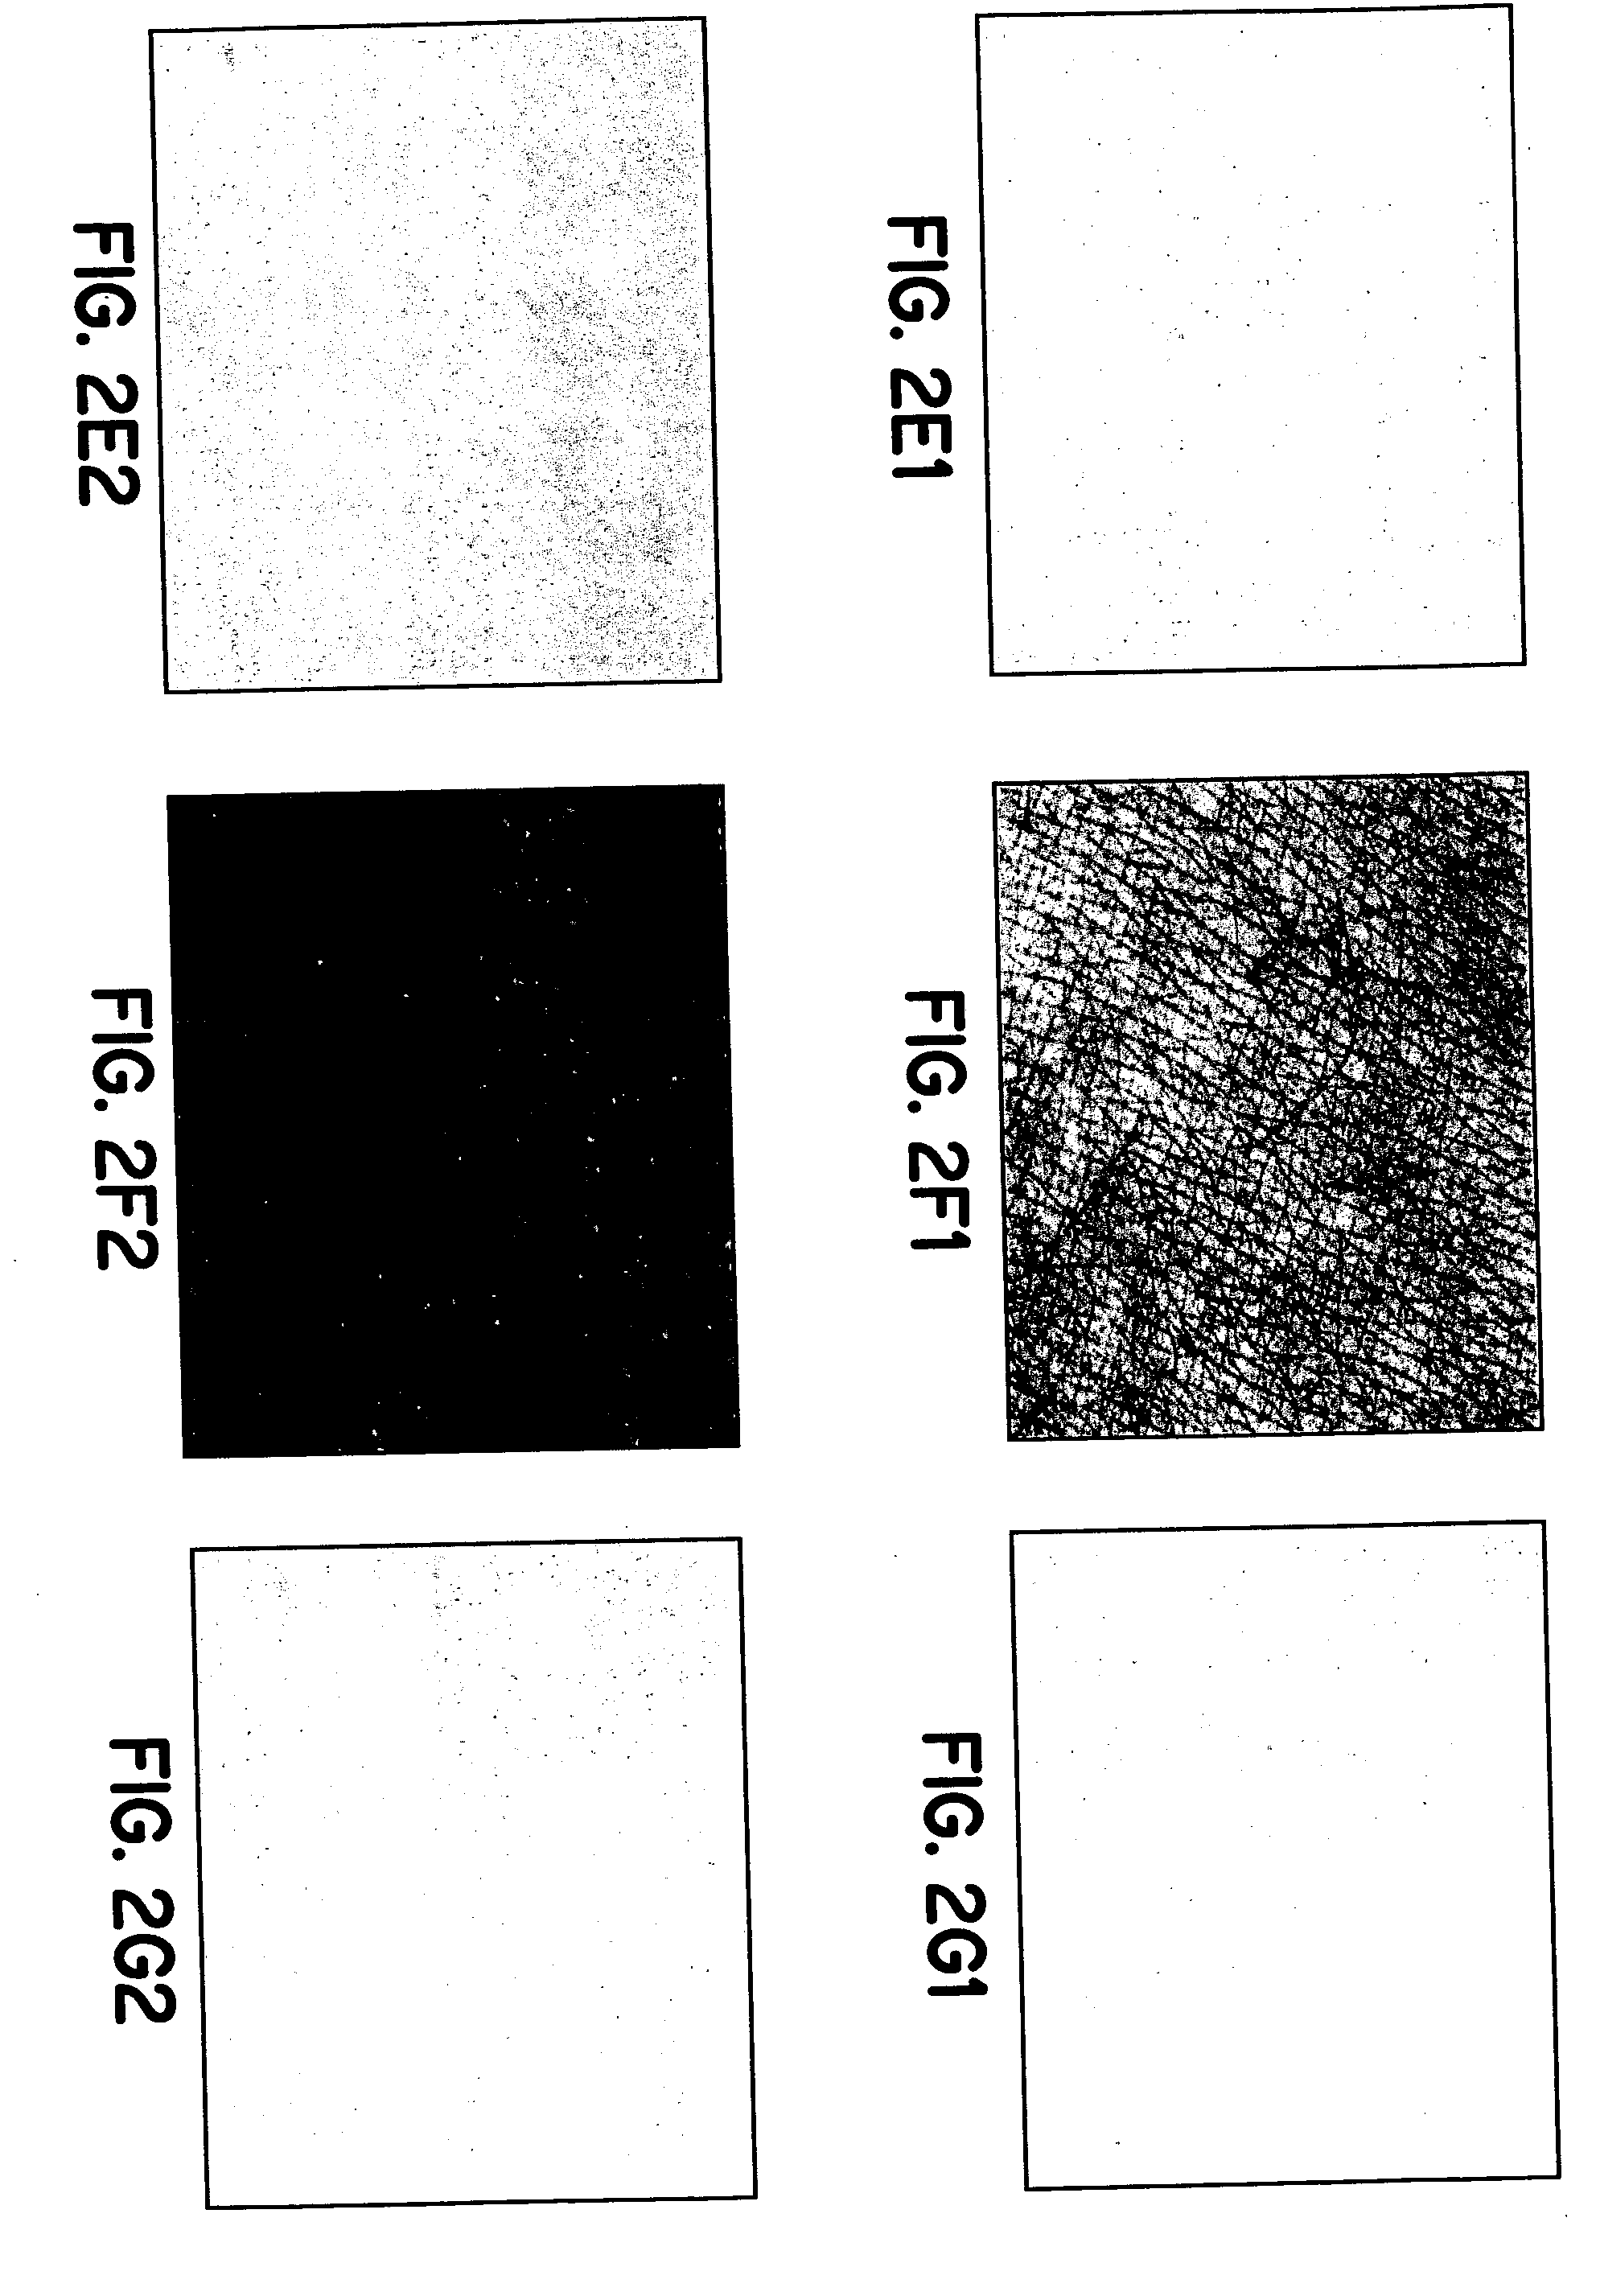 Simulated vernix compositions for skin cleansing and other applications